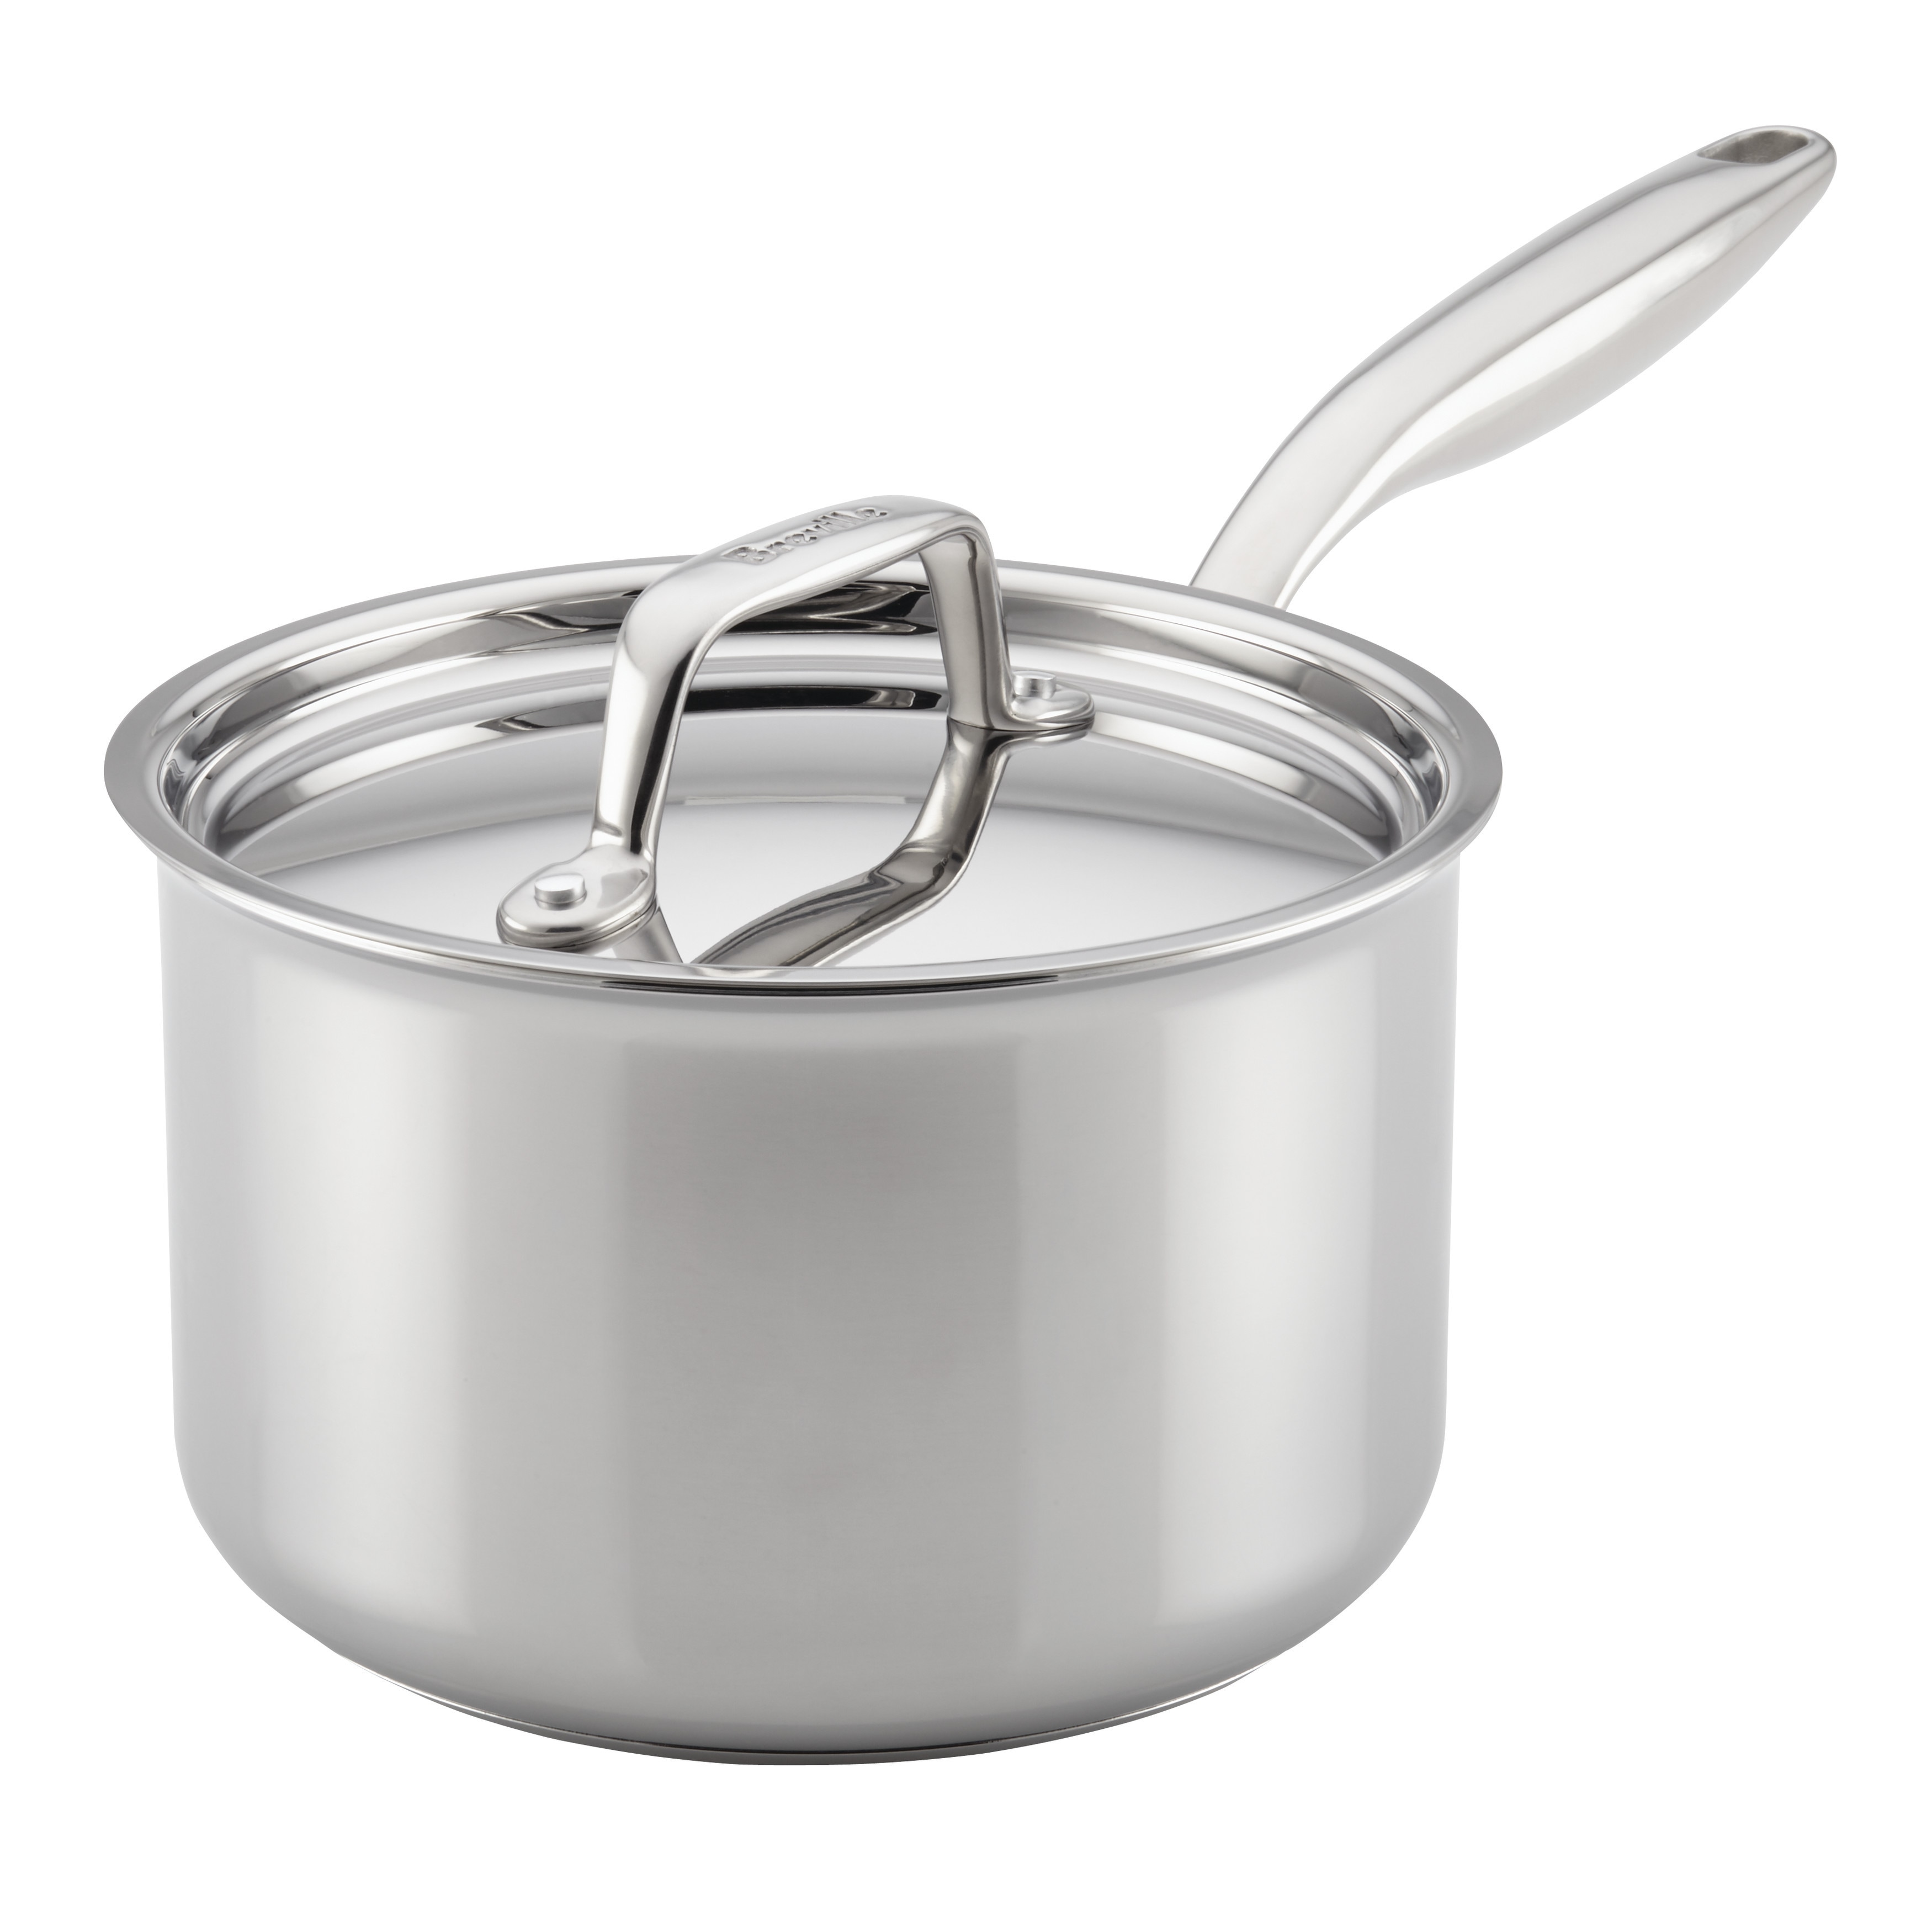 https://ak1.ostkcdn.com/images/products/14819760/Breville-r-Thermal-Pro-tm-Clad-Stainless-Steel-3-Quart-Covered-Saucepan-d6643bd8-dbcc-42e1-925f-f71b1f5ea146.jpg